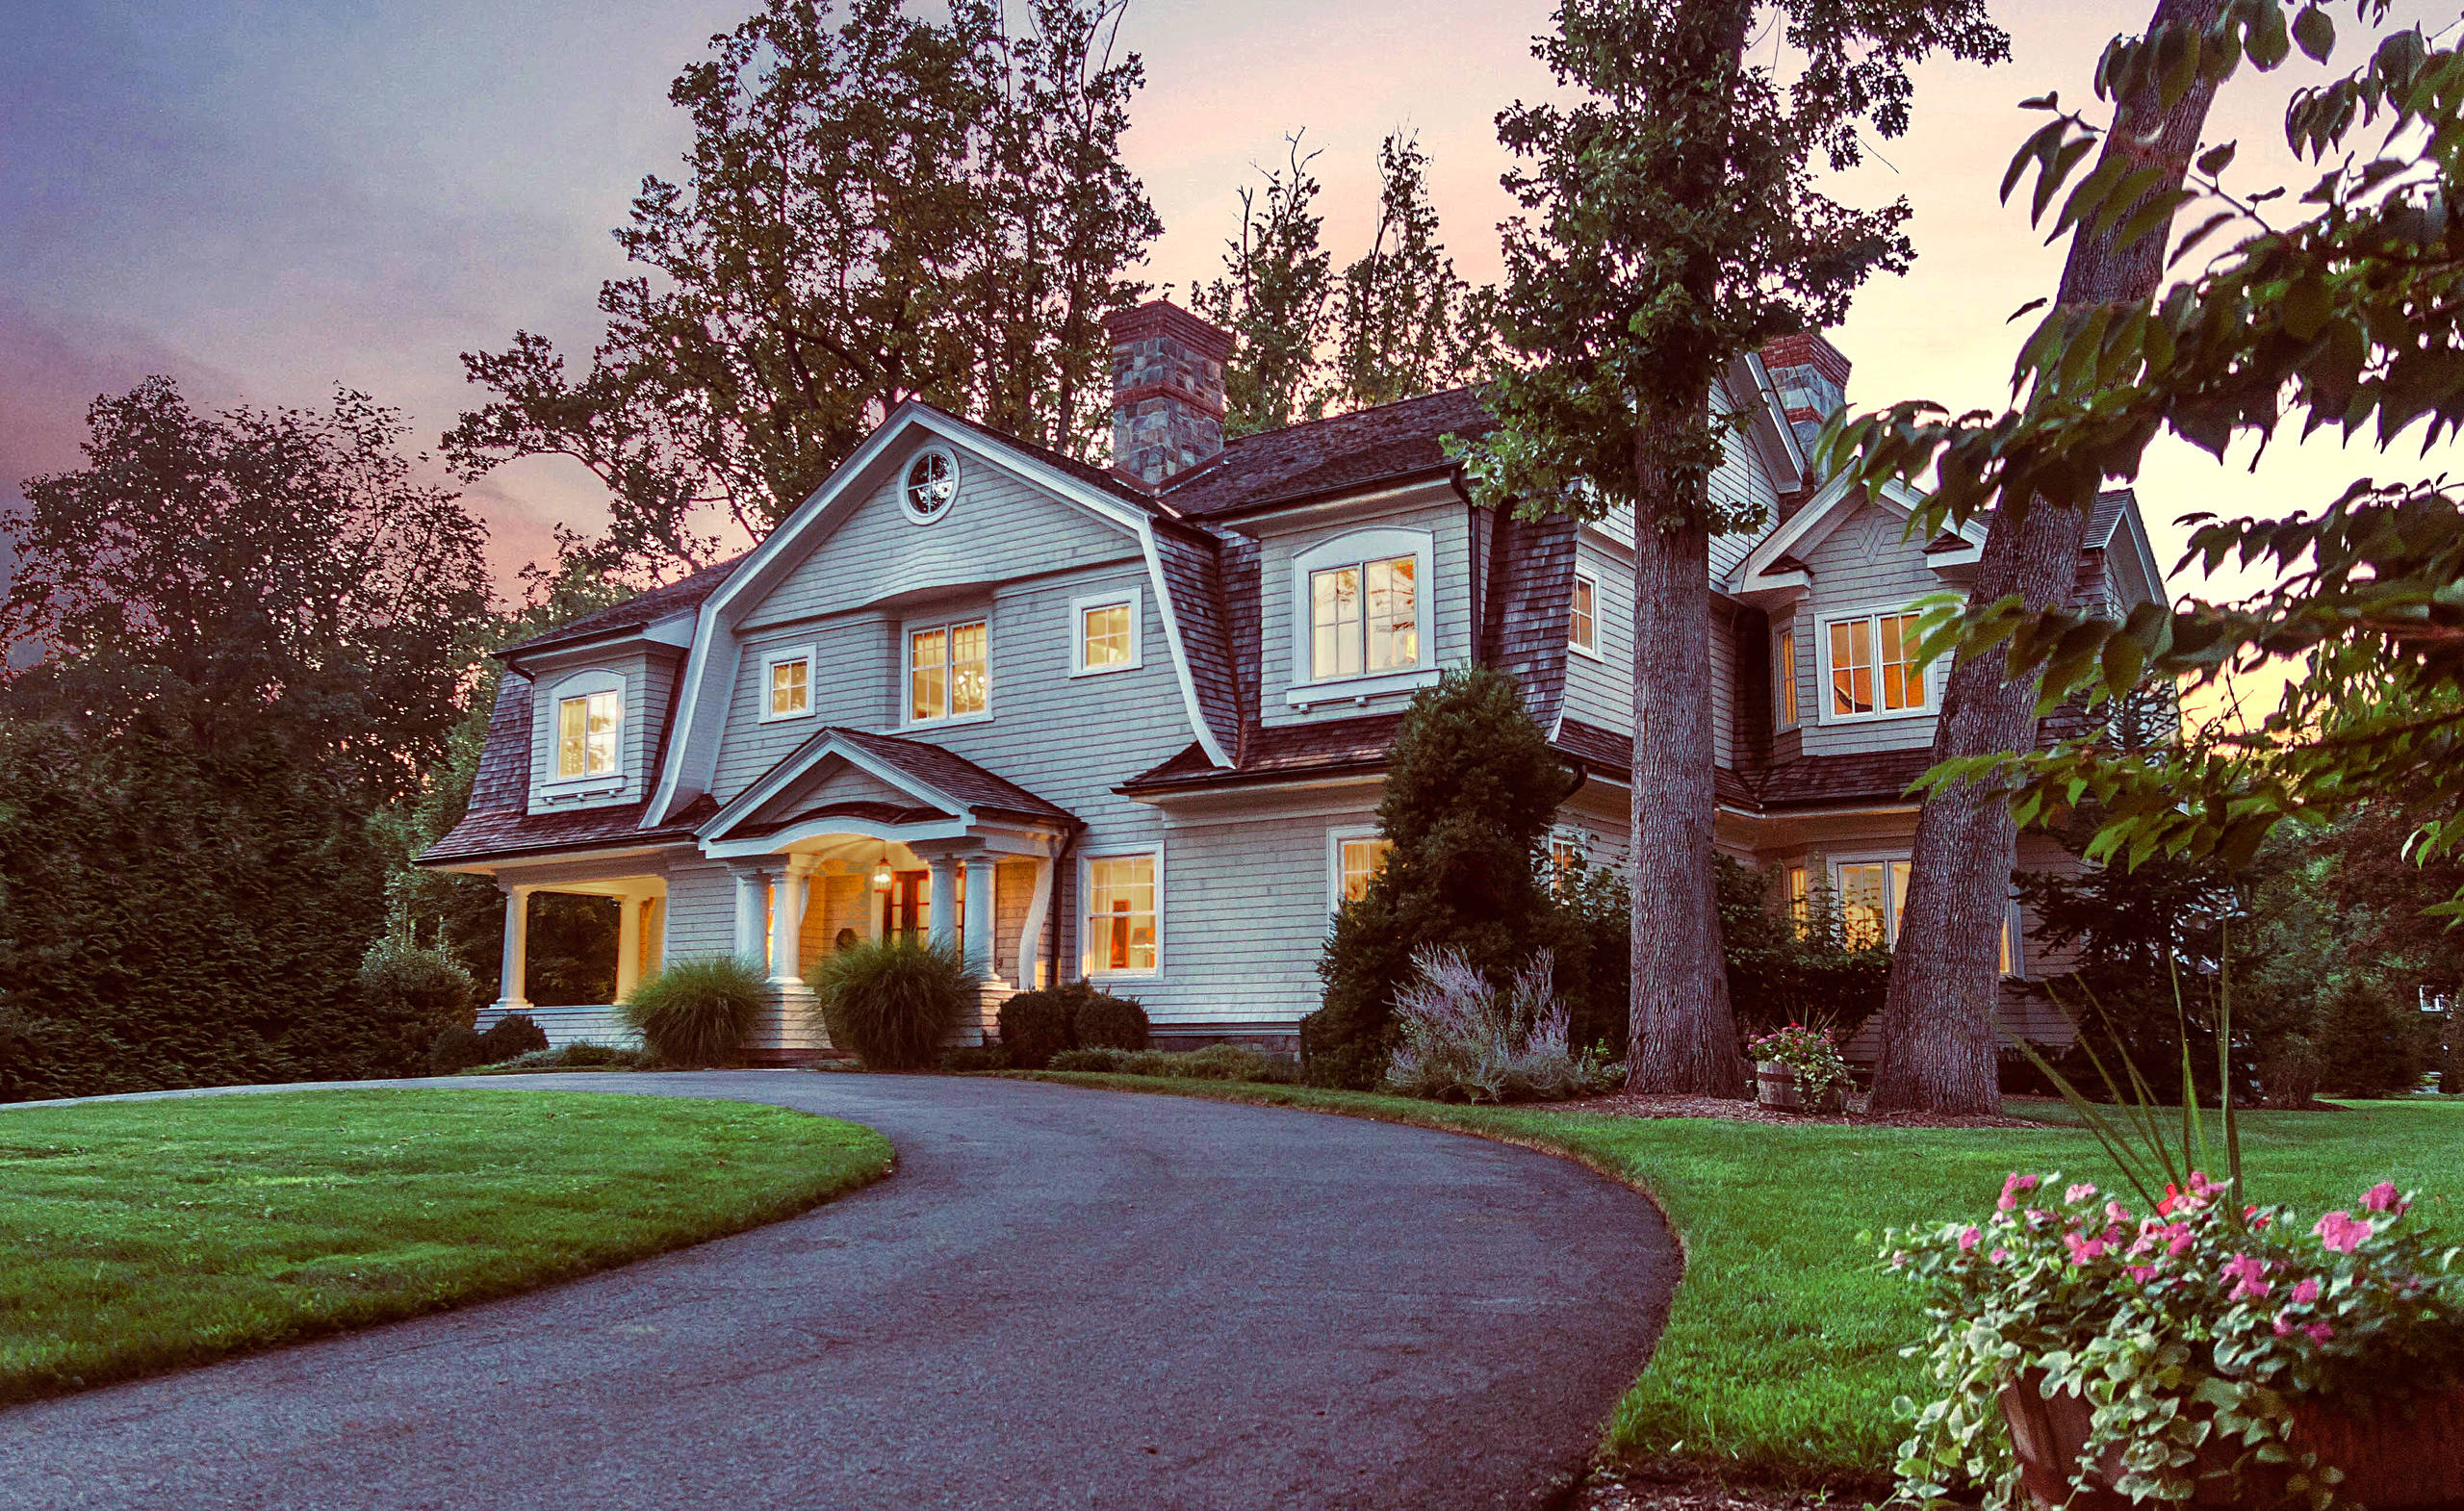 Private Shingle Style Residence in Haworth, NJ